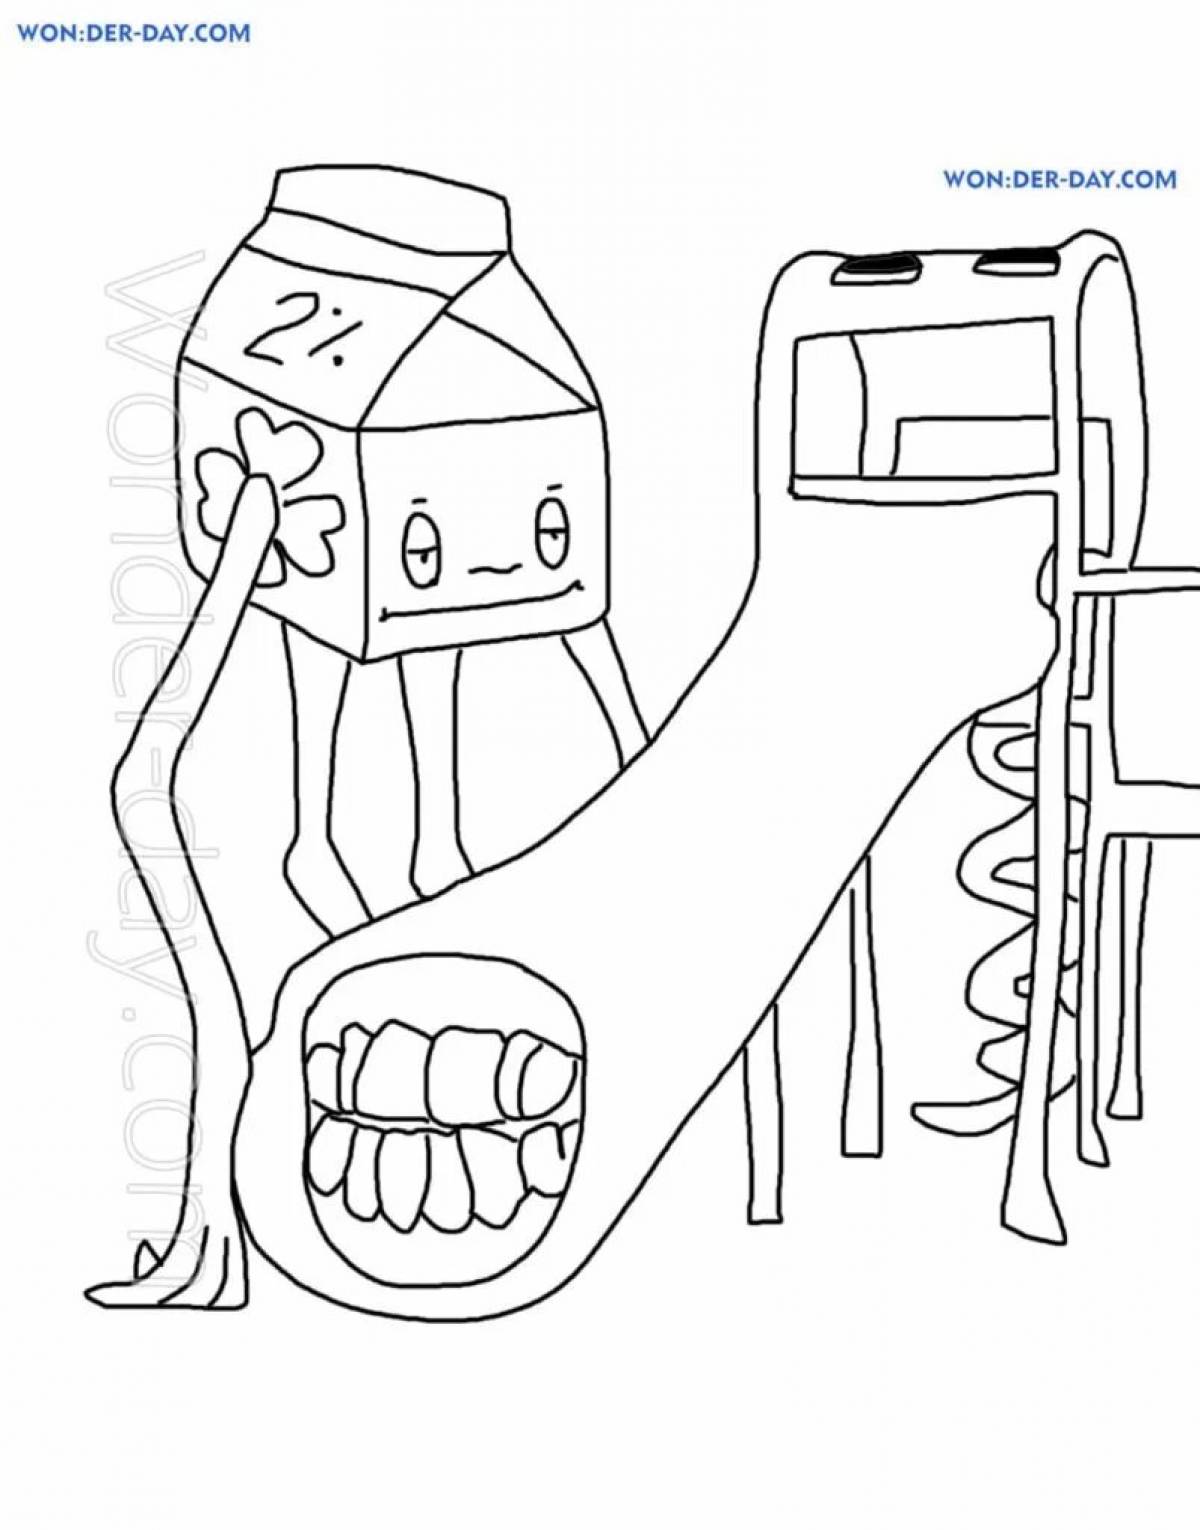 Coloring page strange room eater